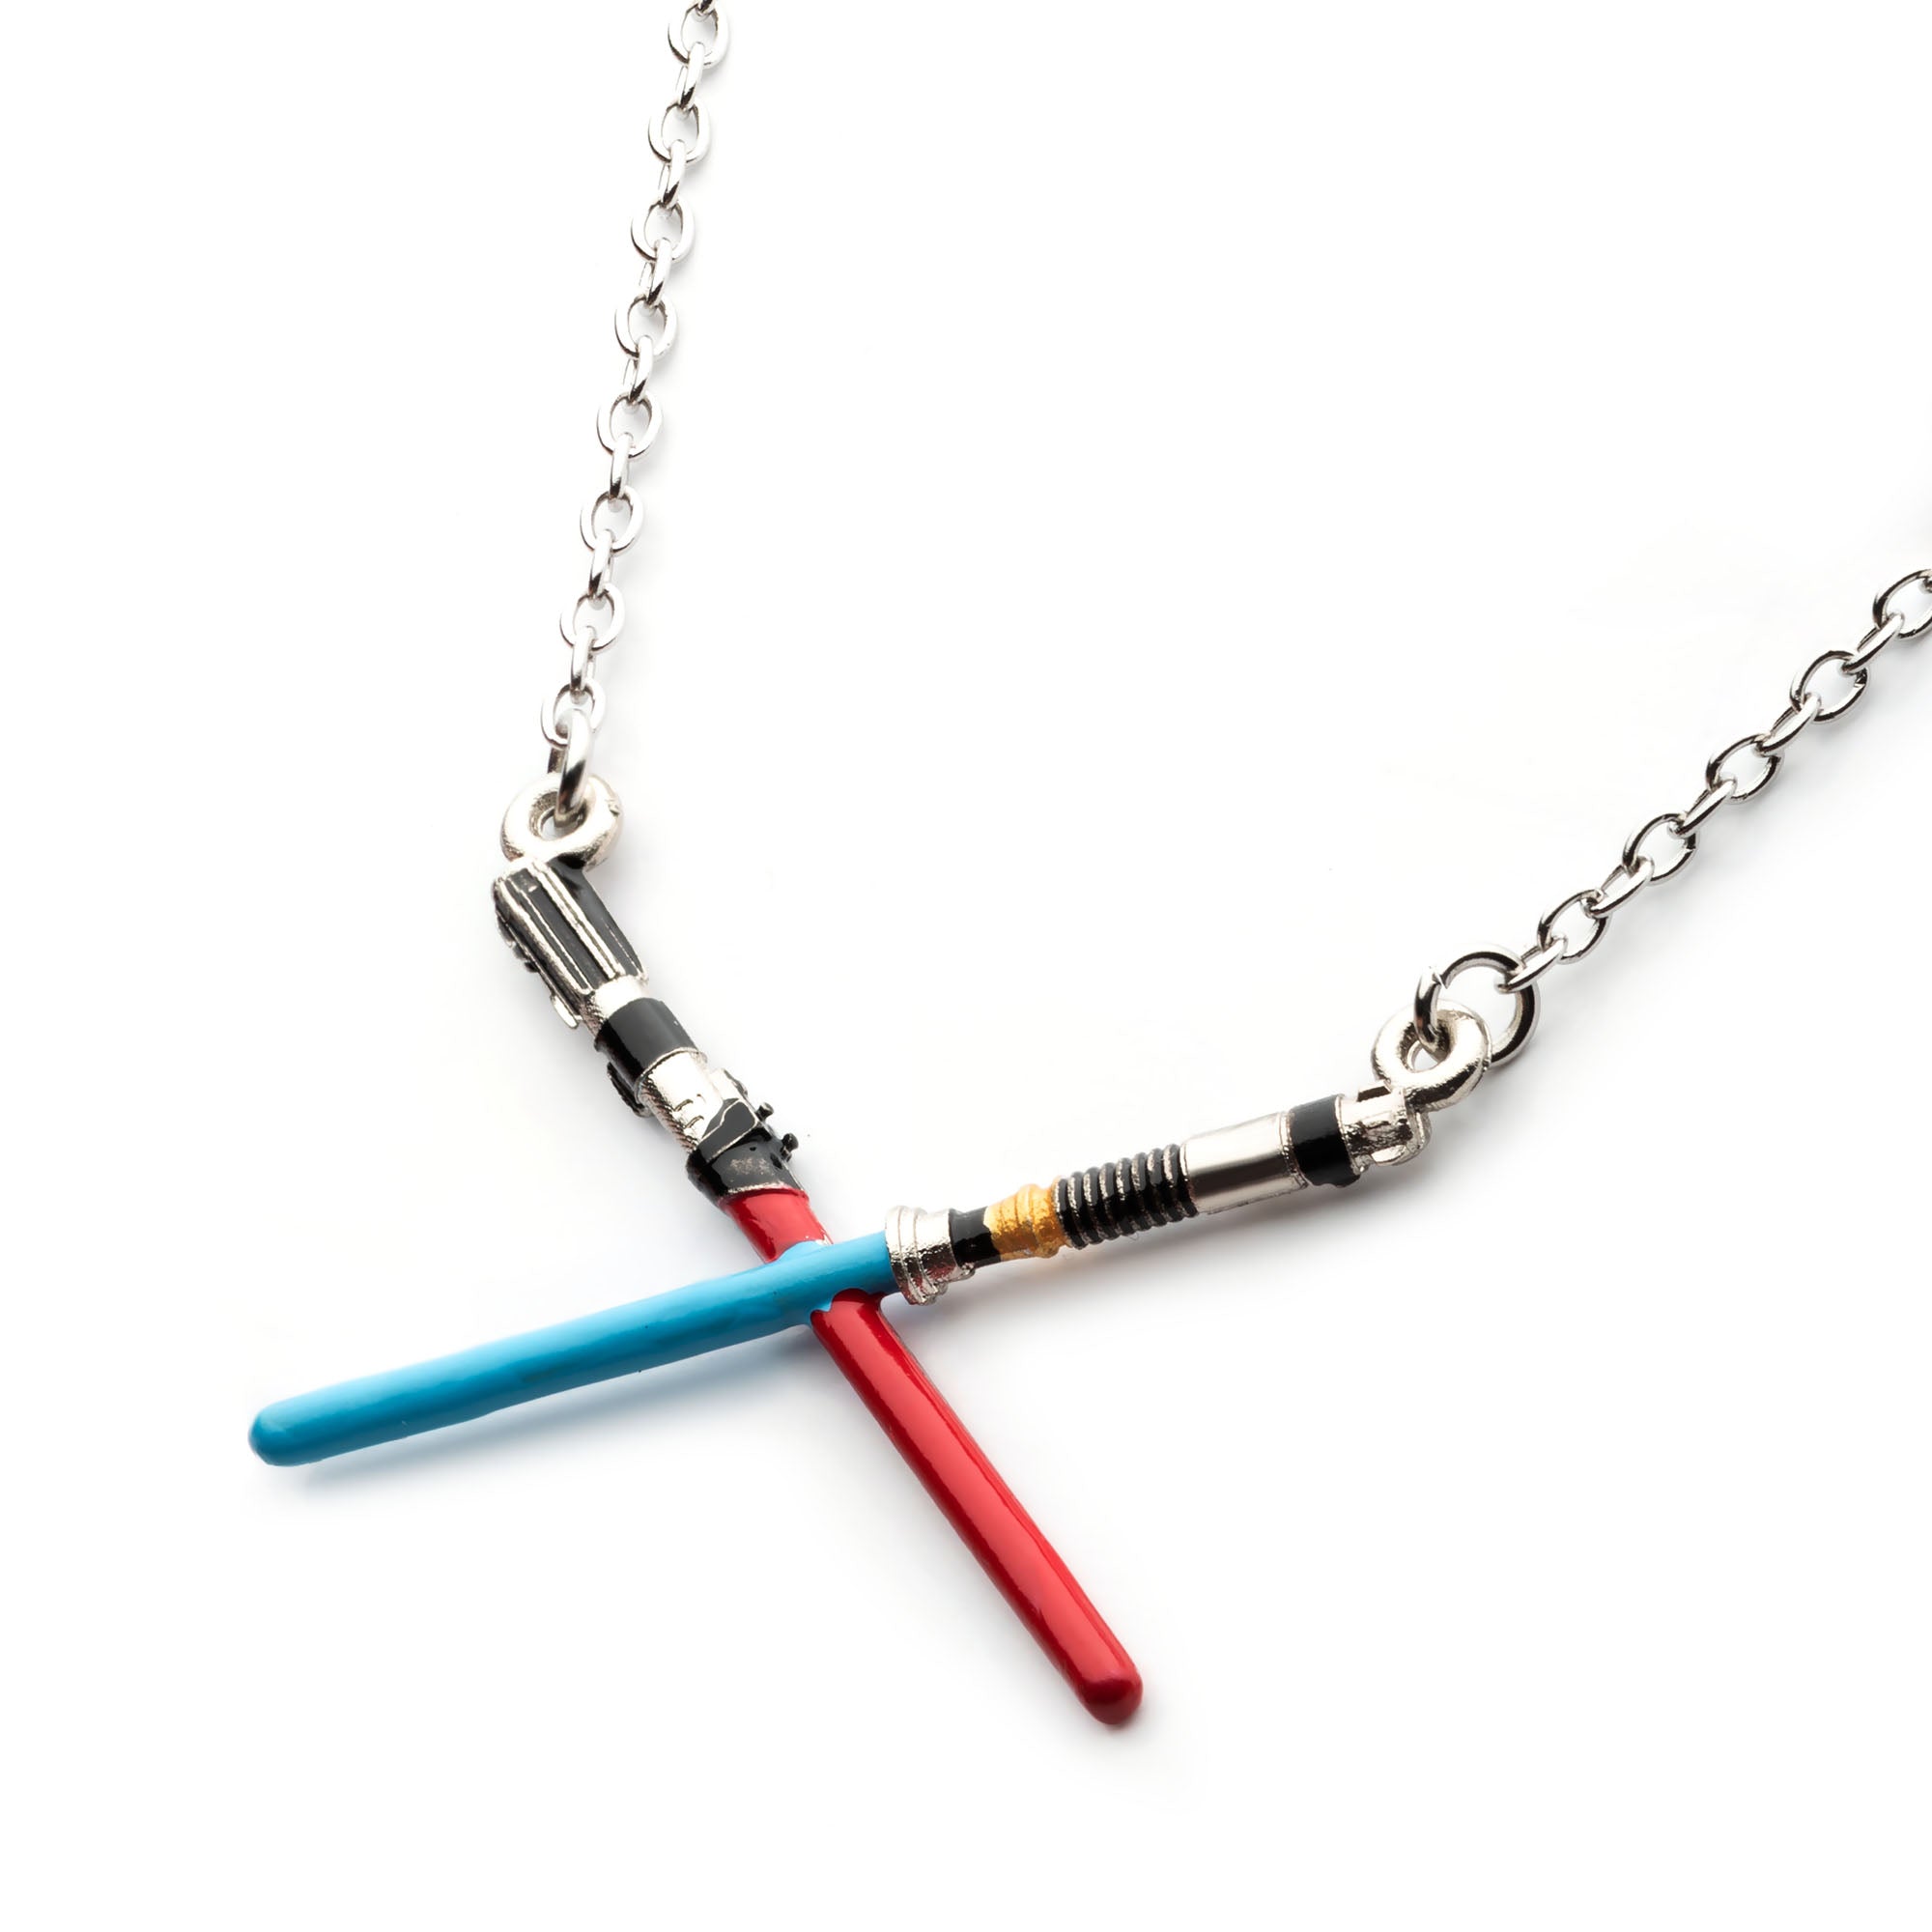 Star Wars Book of Boba Fett Crossed Lightsaber Base Metal Necklace Set with Steel Chain